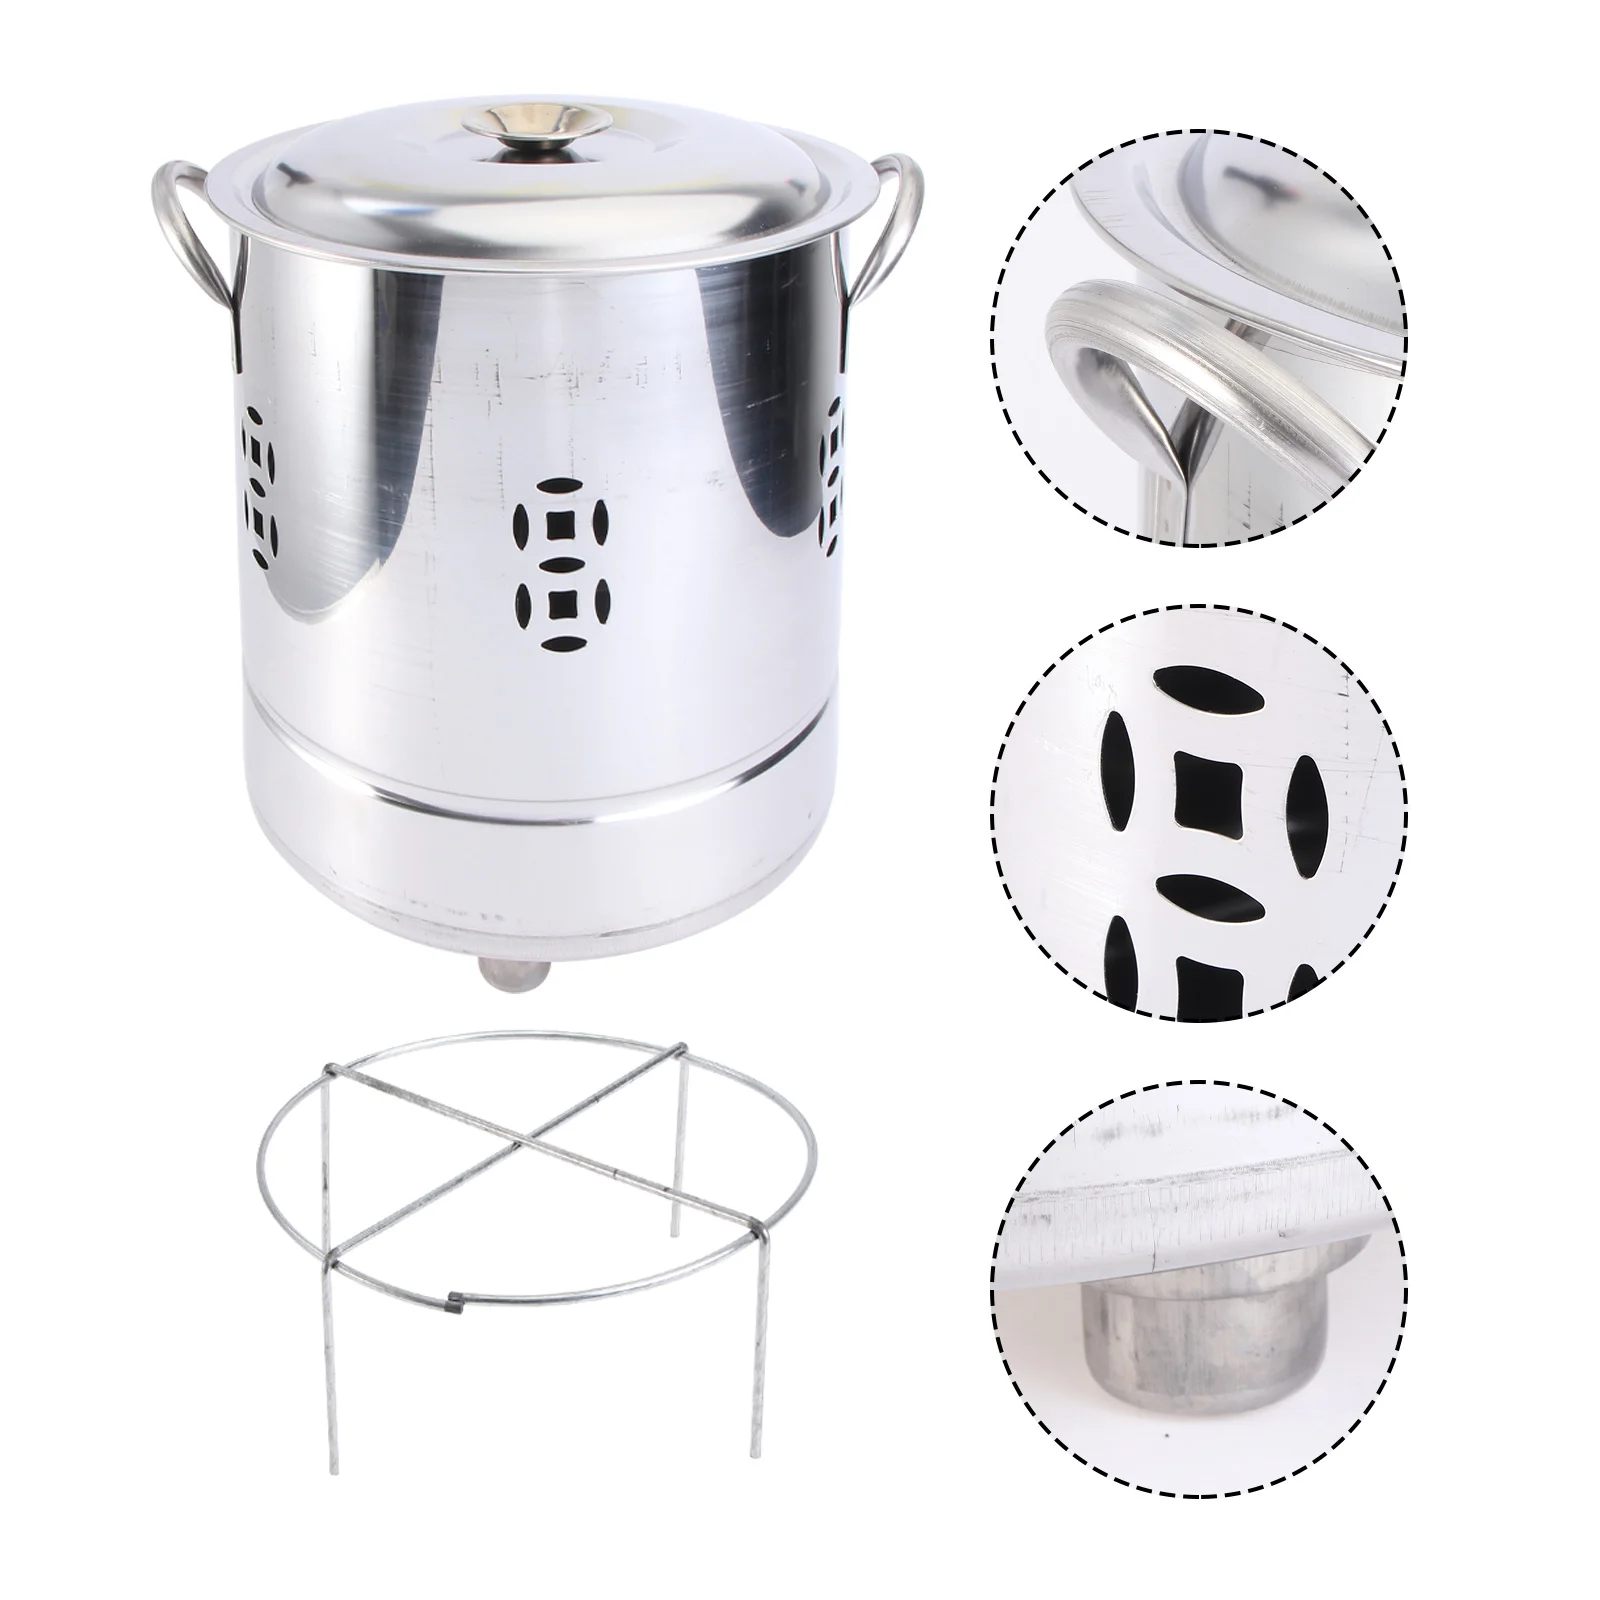 

2 Pcs Incinerator Metal Trash Can Home Round Bin Camping Garbage Stainless Steel Burning Paper Bucket Container Disposal